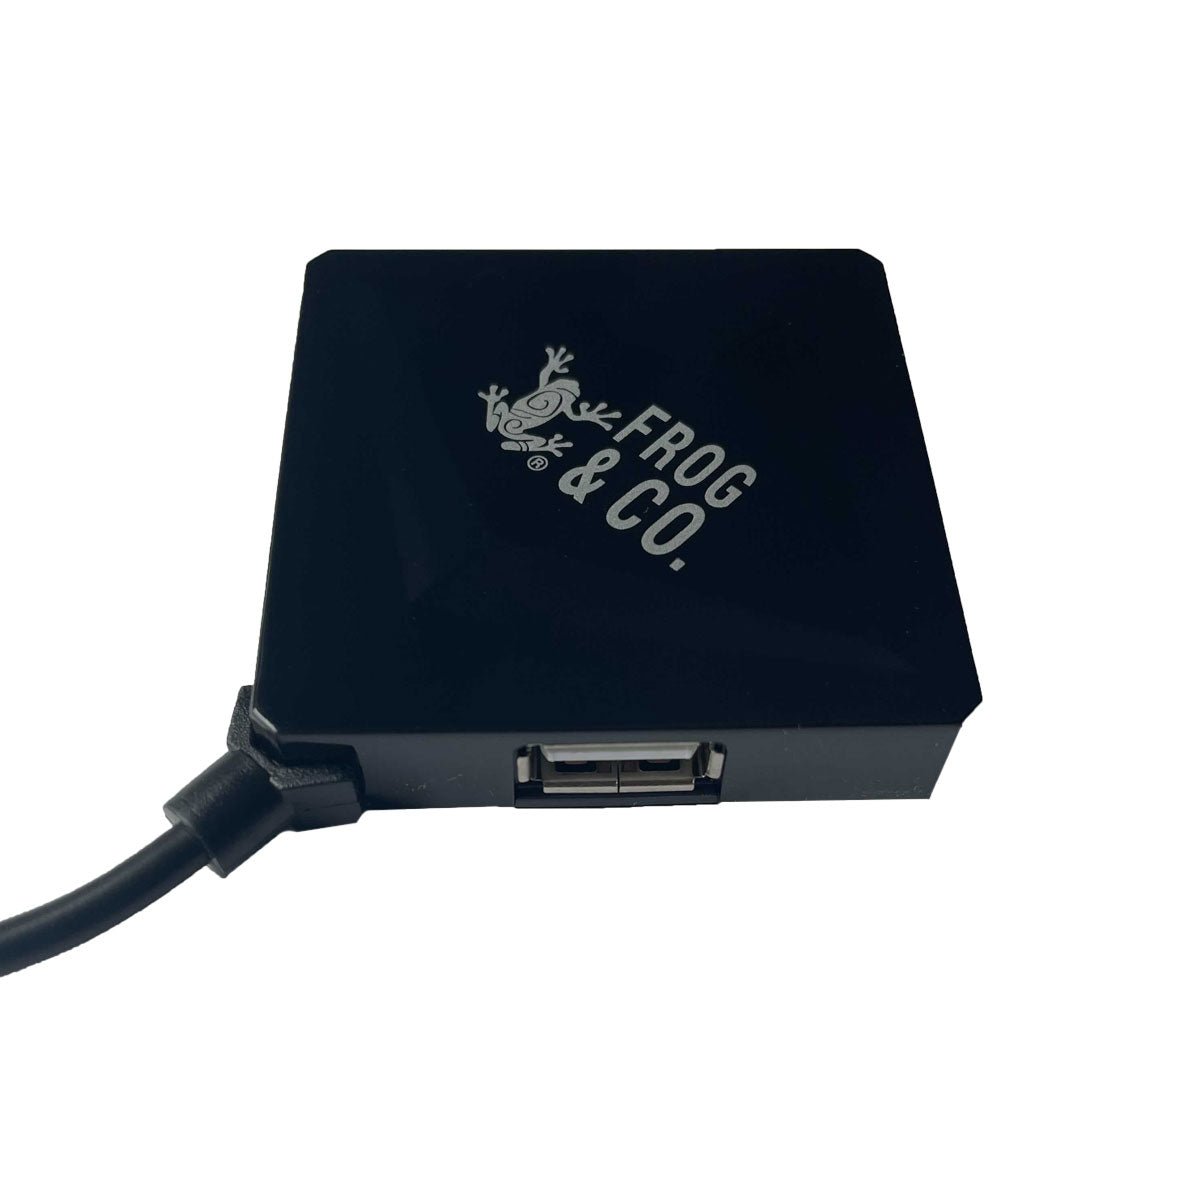 USB 4-Port Charger 2.0 - Groove Rabbit